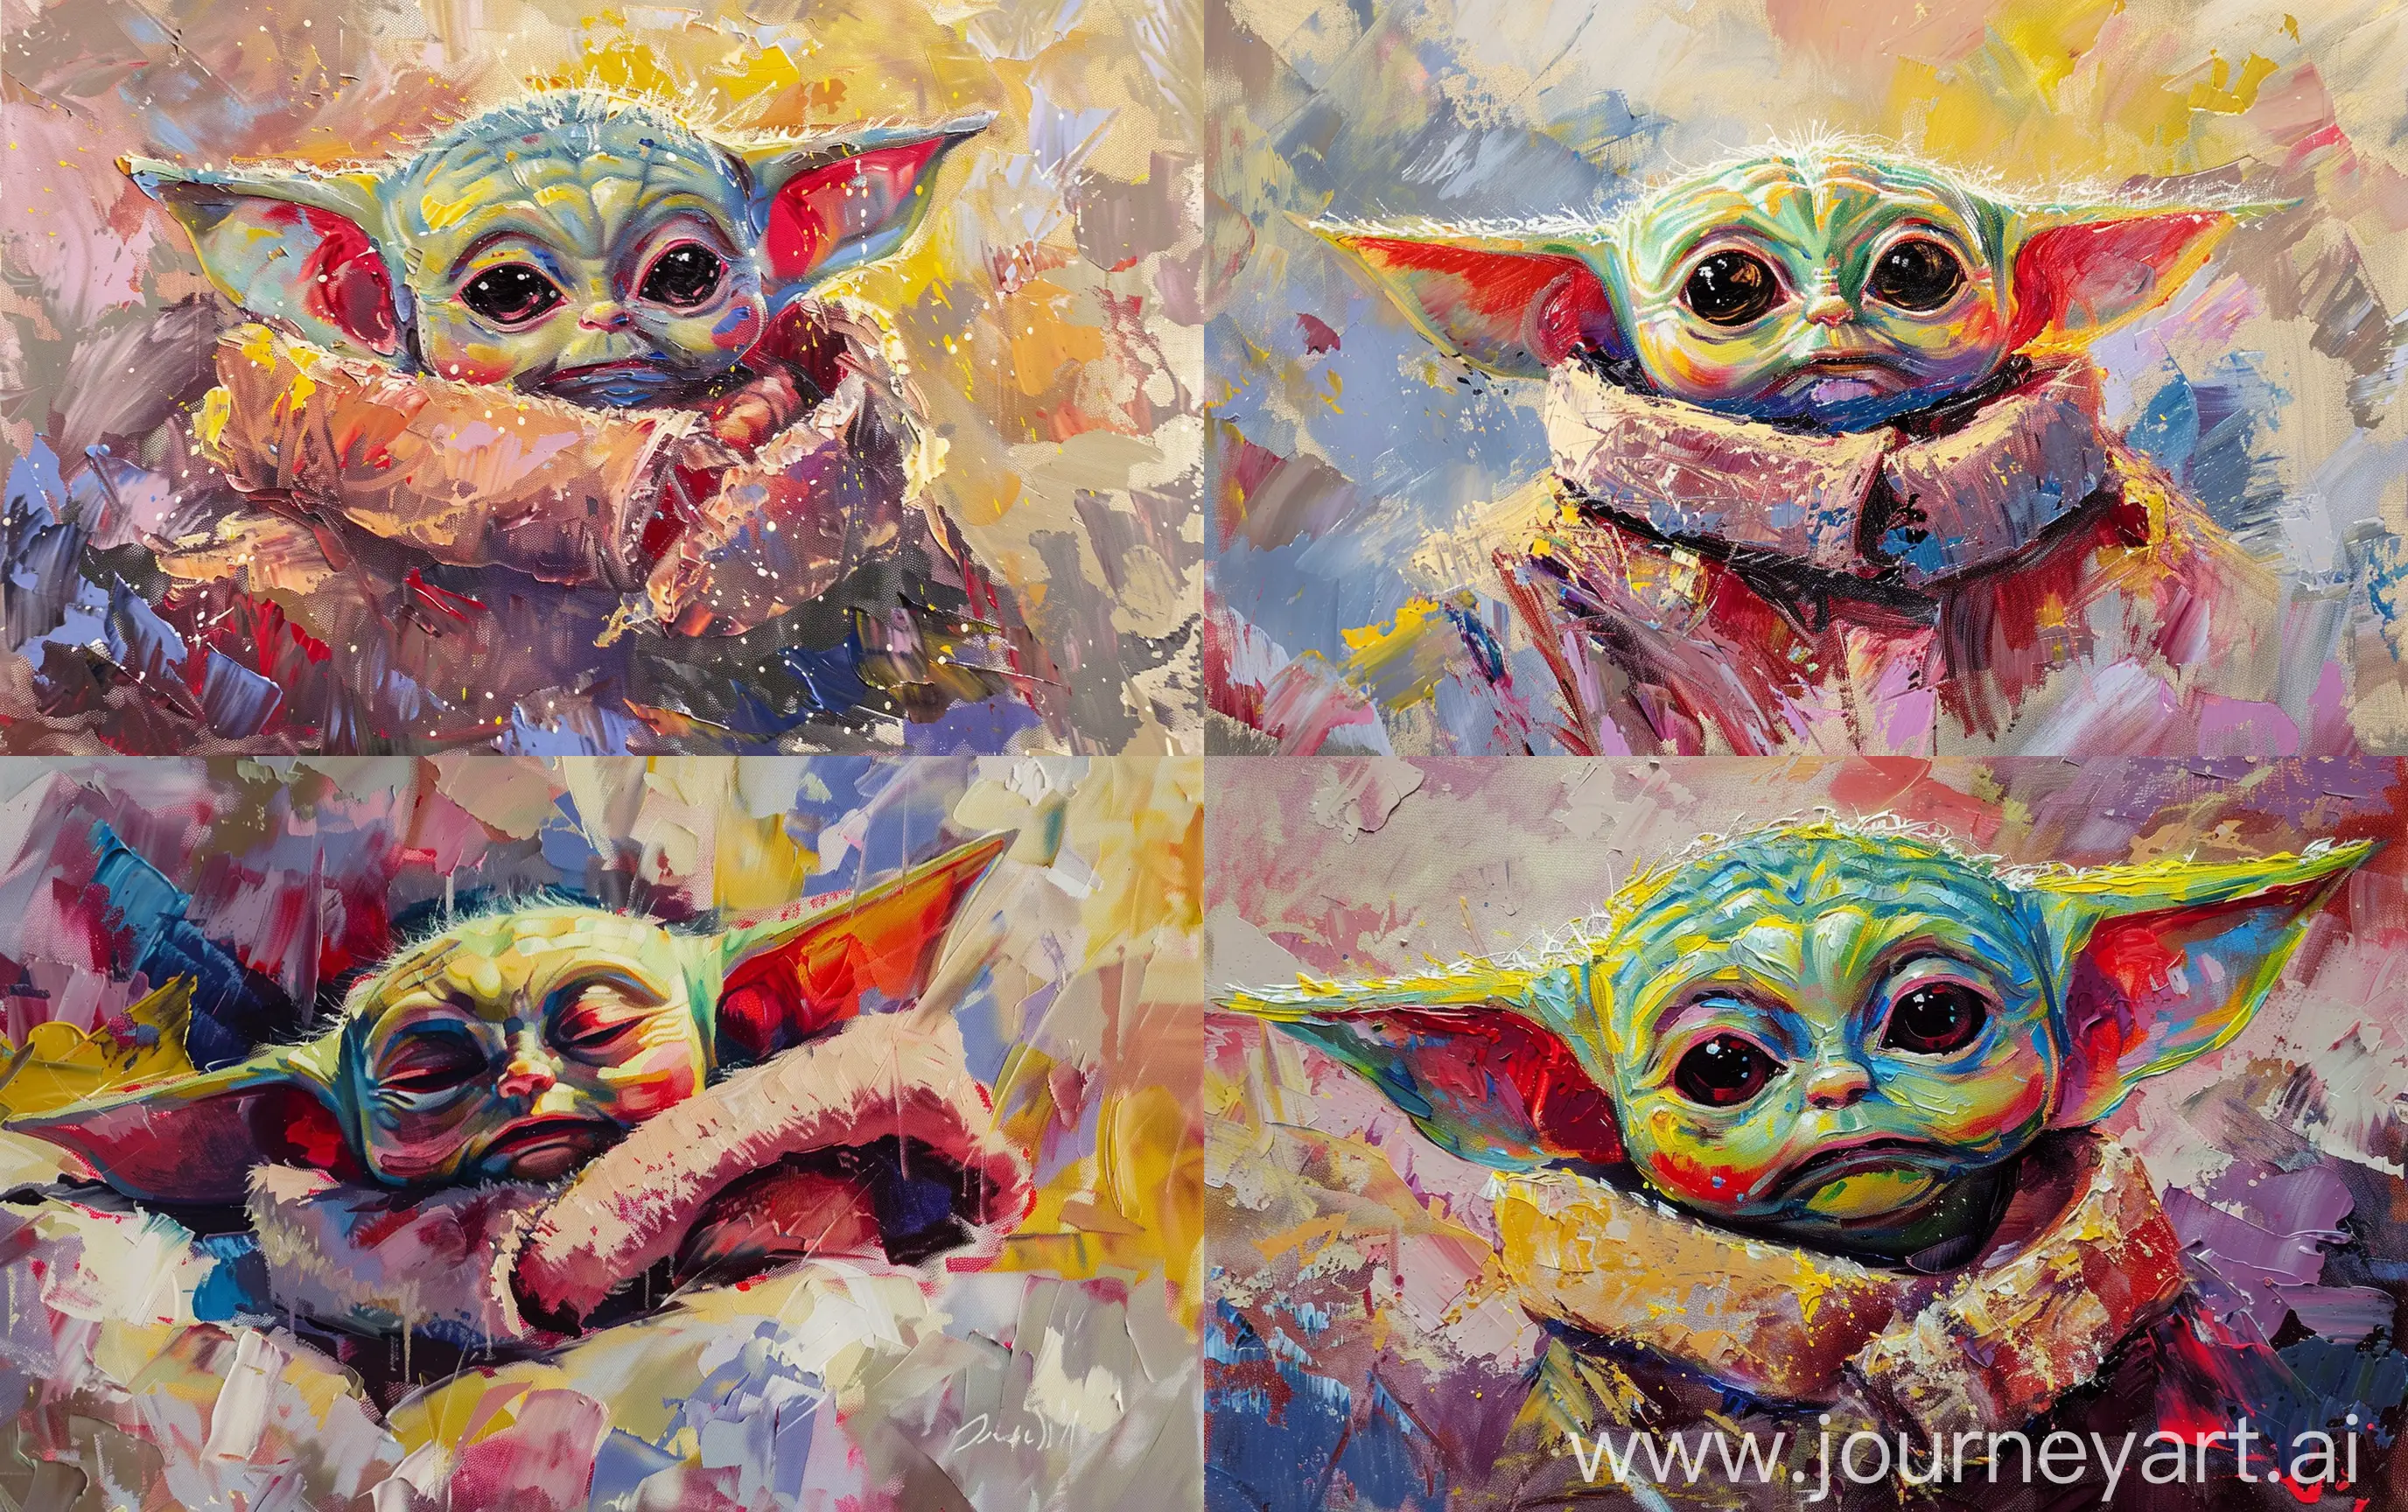 oil painting in impressionistic style of baby yoda with red, yellow and blue hues. with soft pastel colors with brushstrokes in shades of pink, purple and yellow creating an abstract and warm atmosphere. the overall feel of the painting is cozy and serene --ar 16:10
